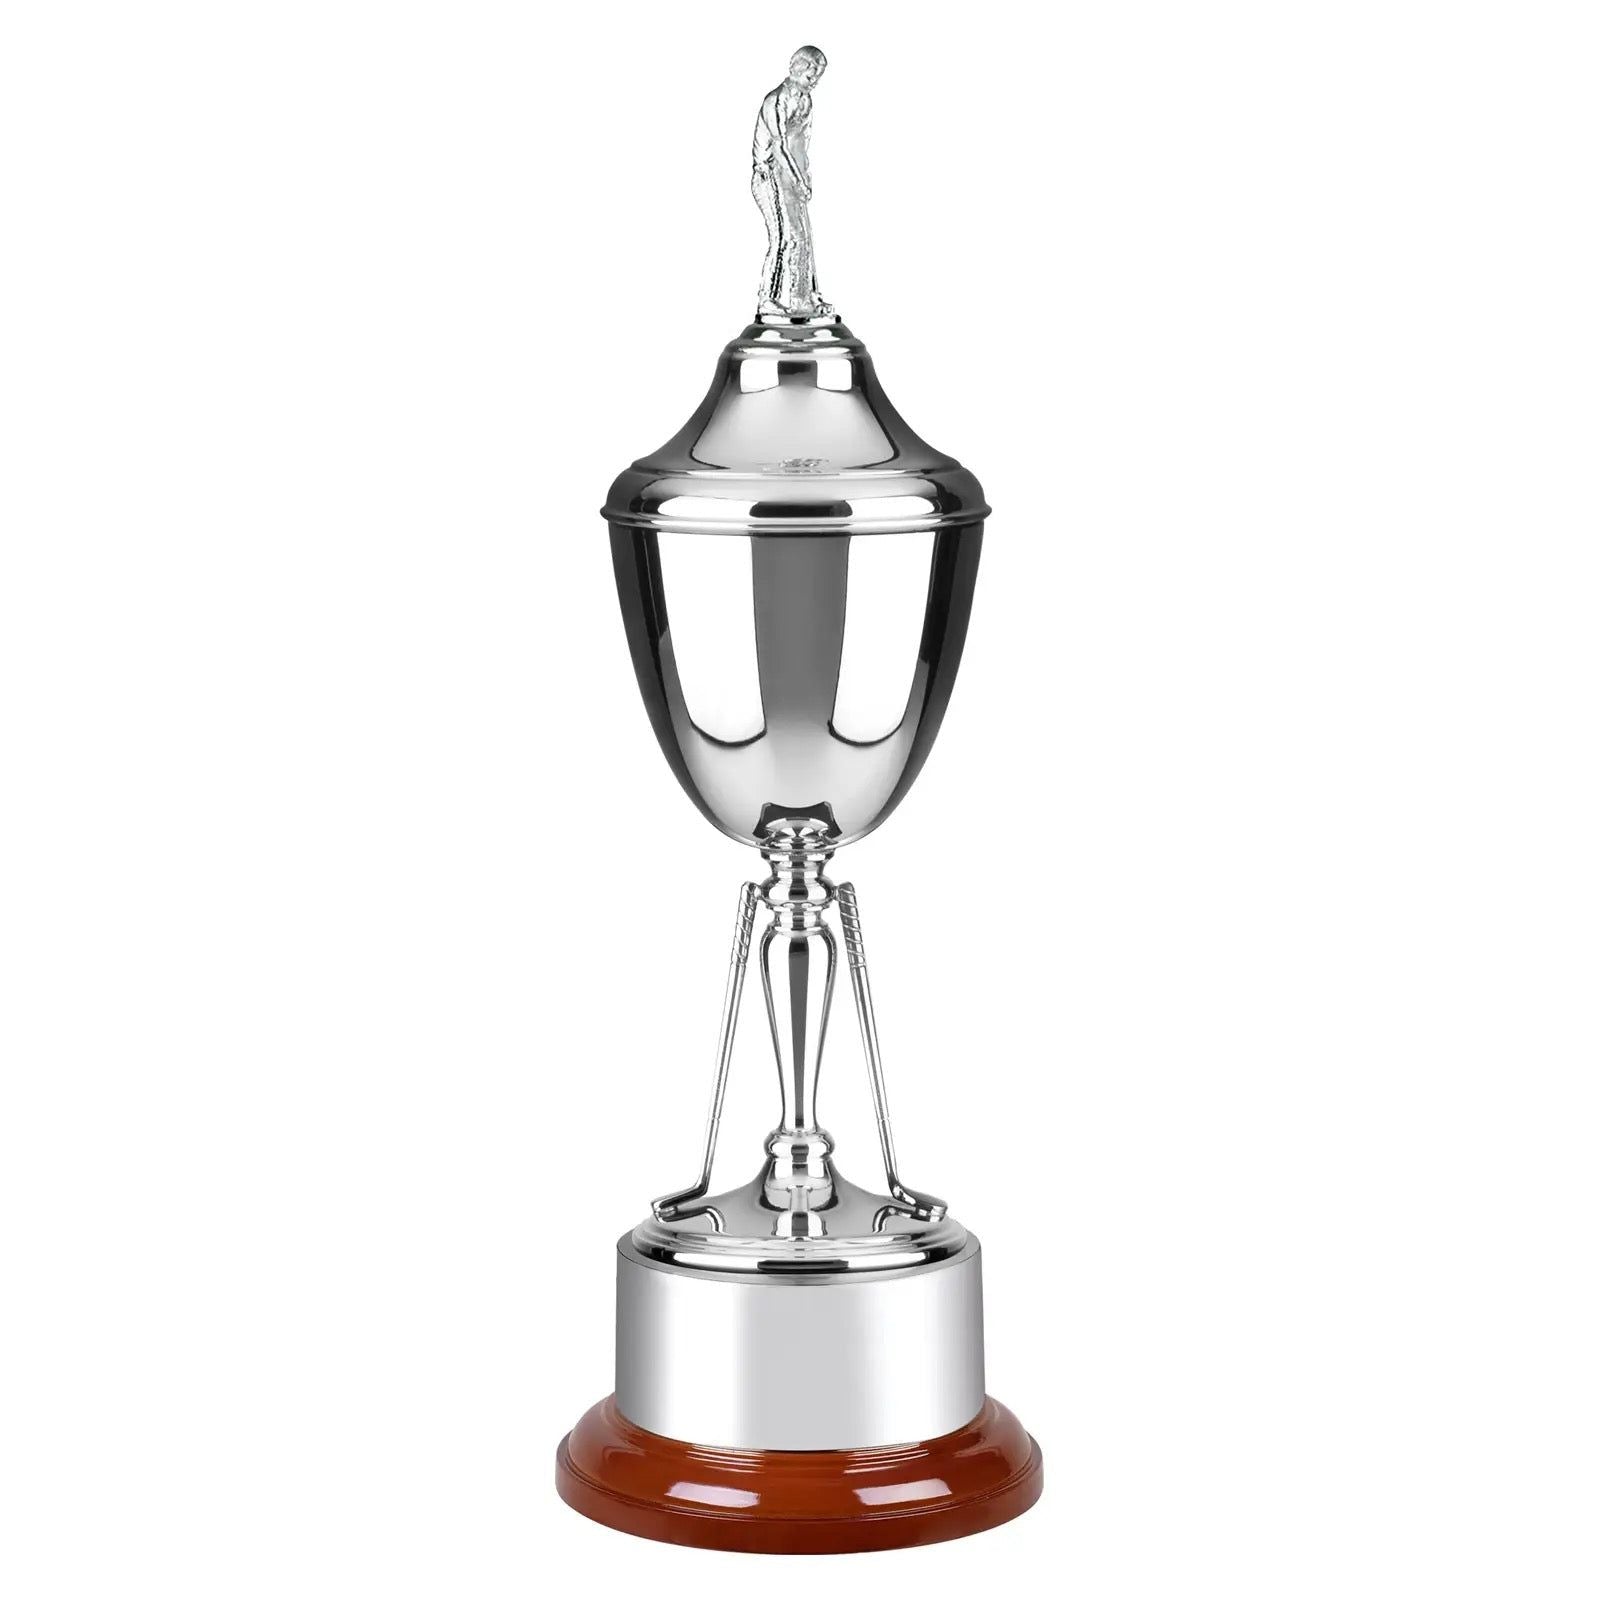 Nickel Plated Country Club Cup Award - With Golf Lid